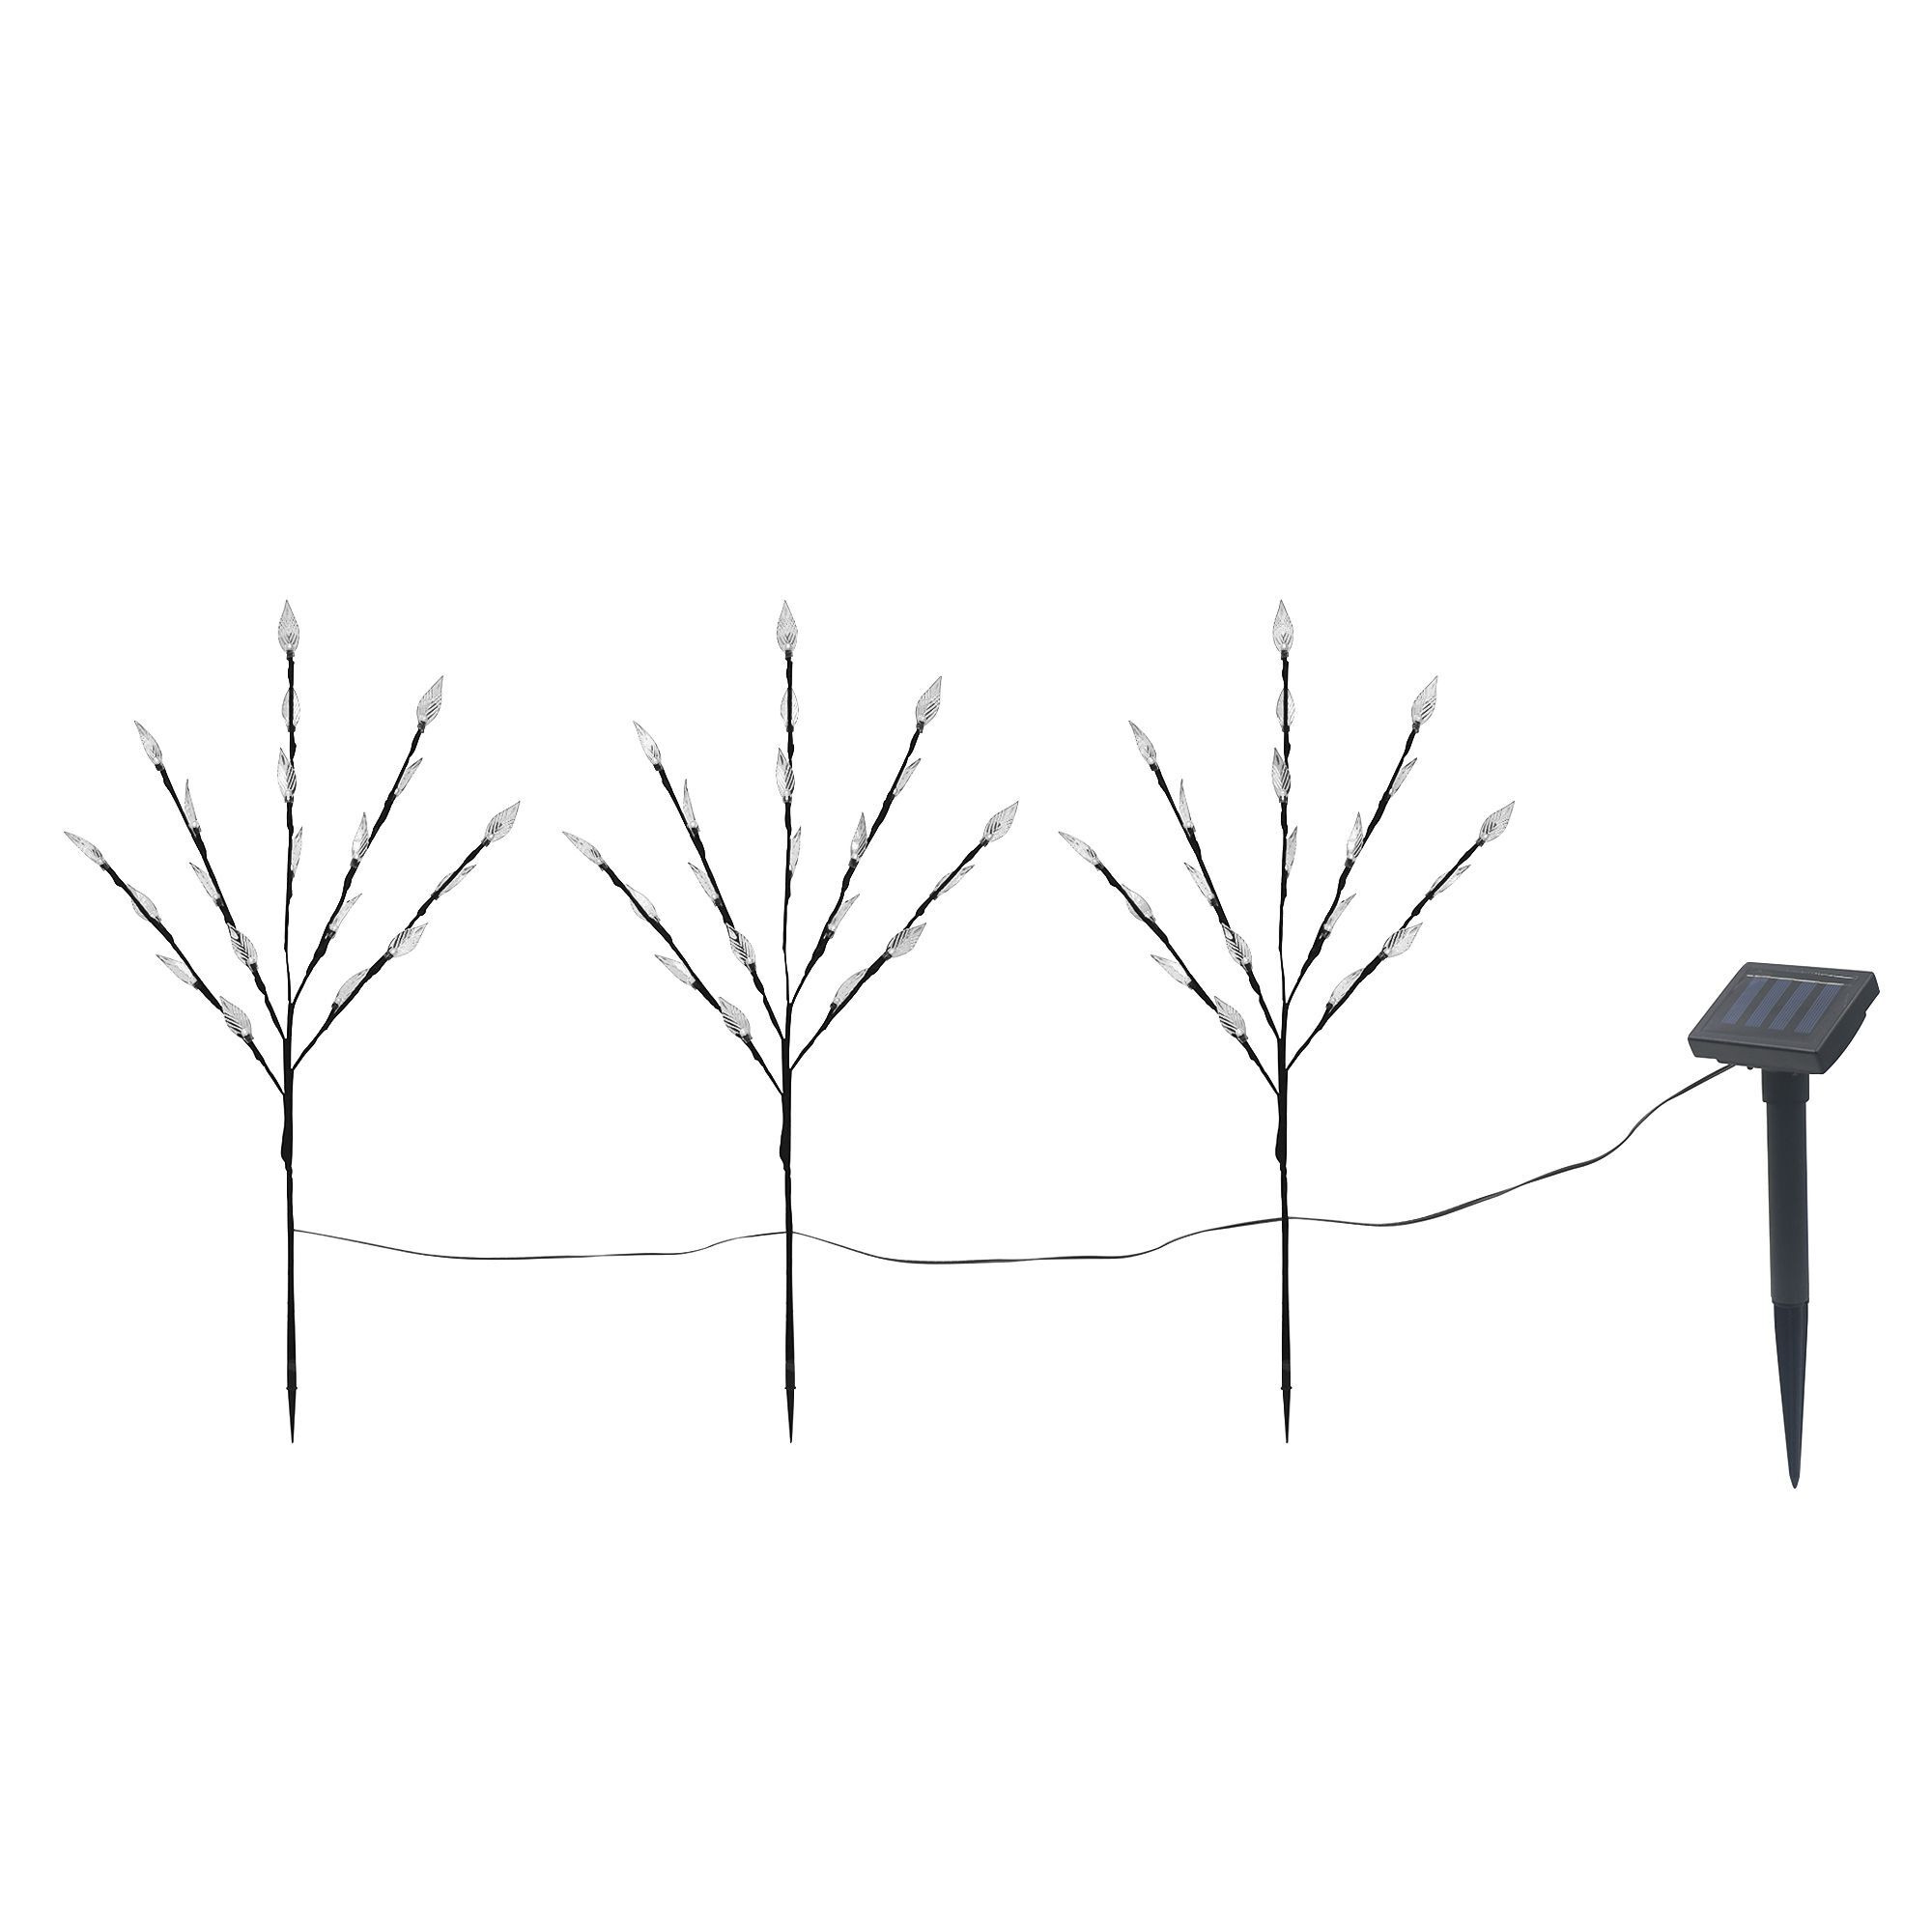 Diso Brown Tree Solar-Powered Led Outdoor Stake Light, Set Of 3